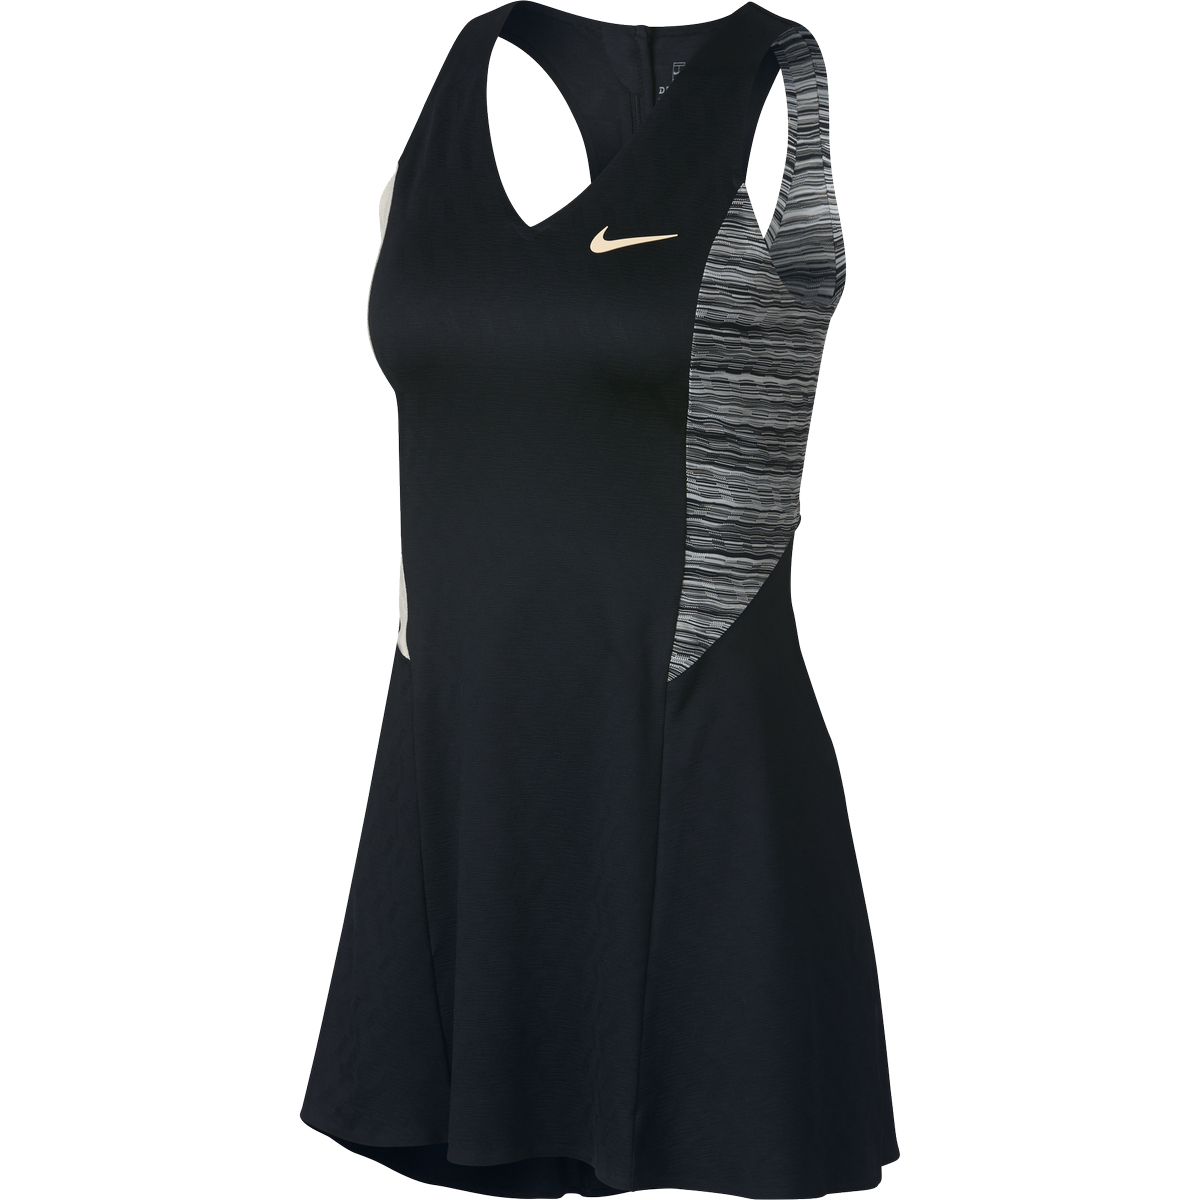 Here is what Maria Sharapova will wear at the US Open (Pics Inside)